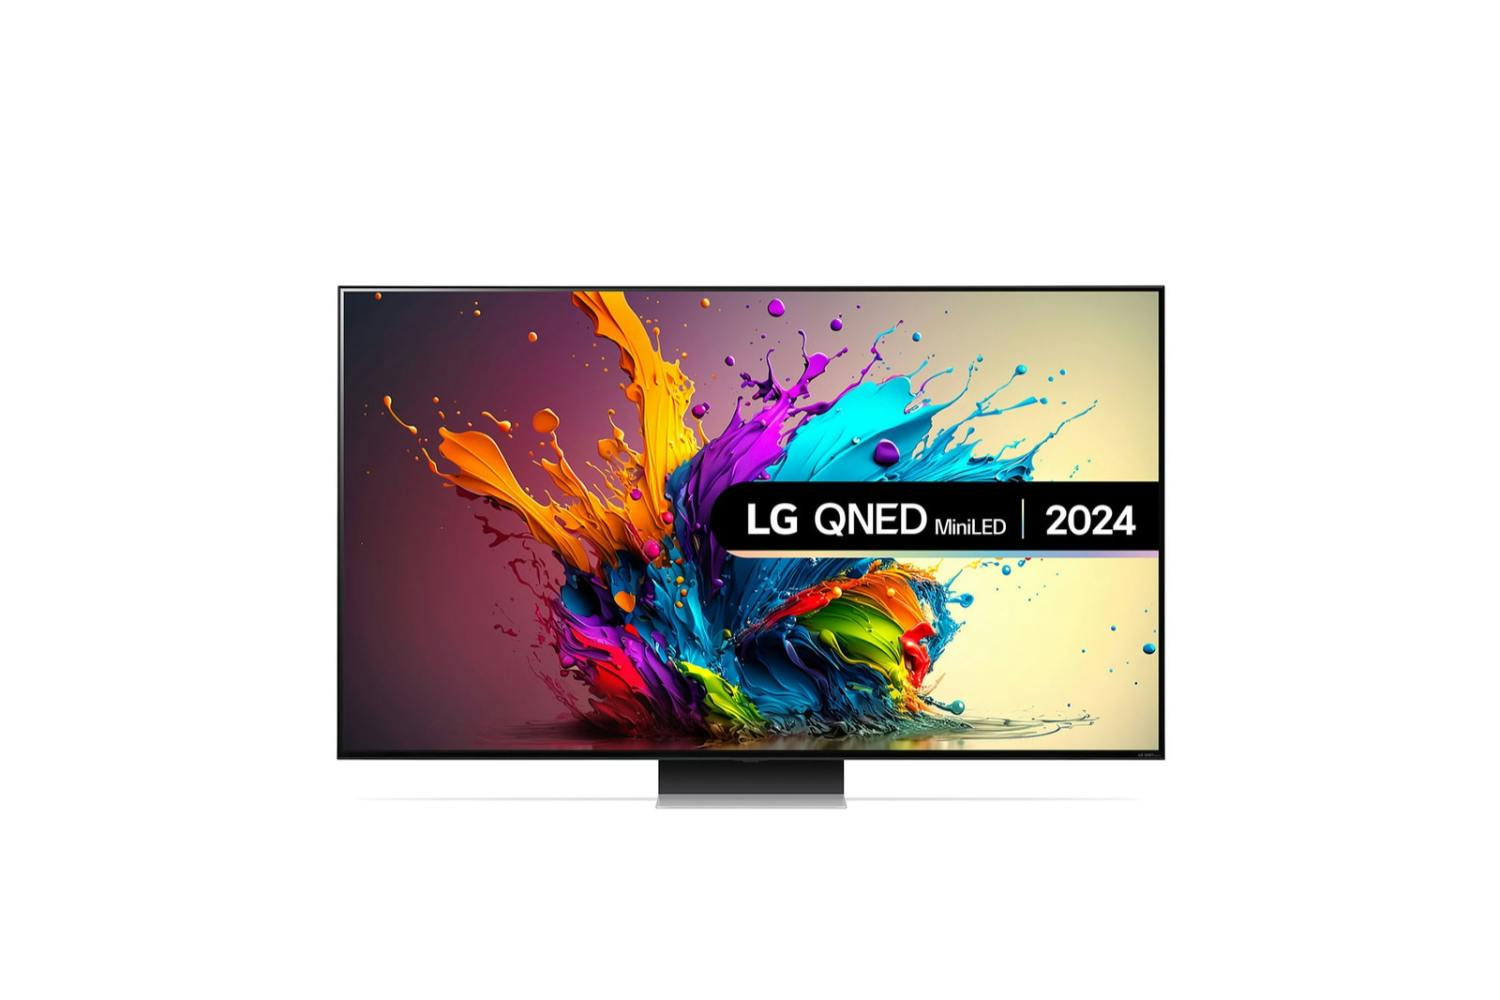 LG 65" QNED91 MiniLED 4K Smart TV (2024) | 65QNED91T6A.AEK